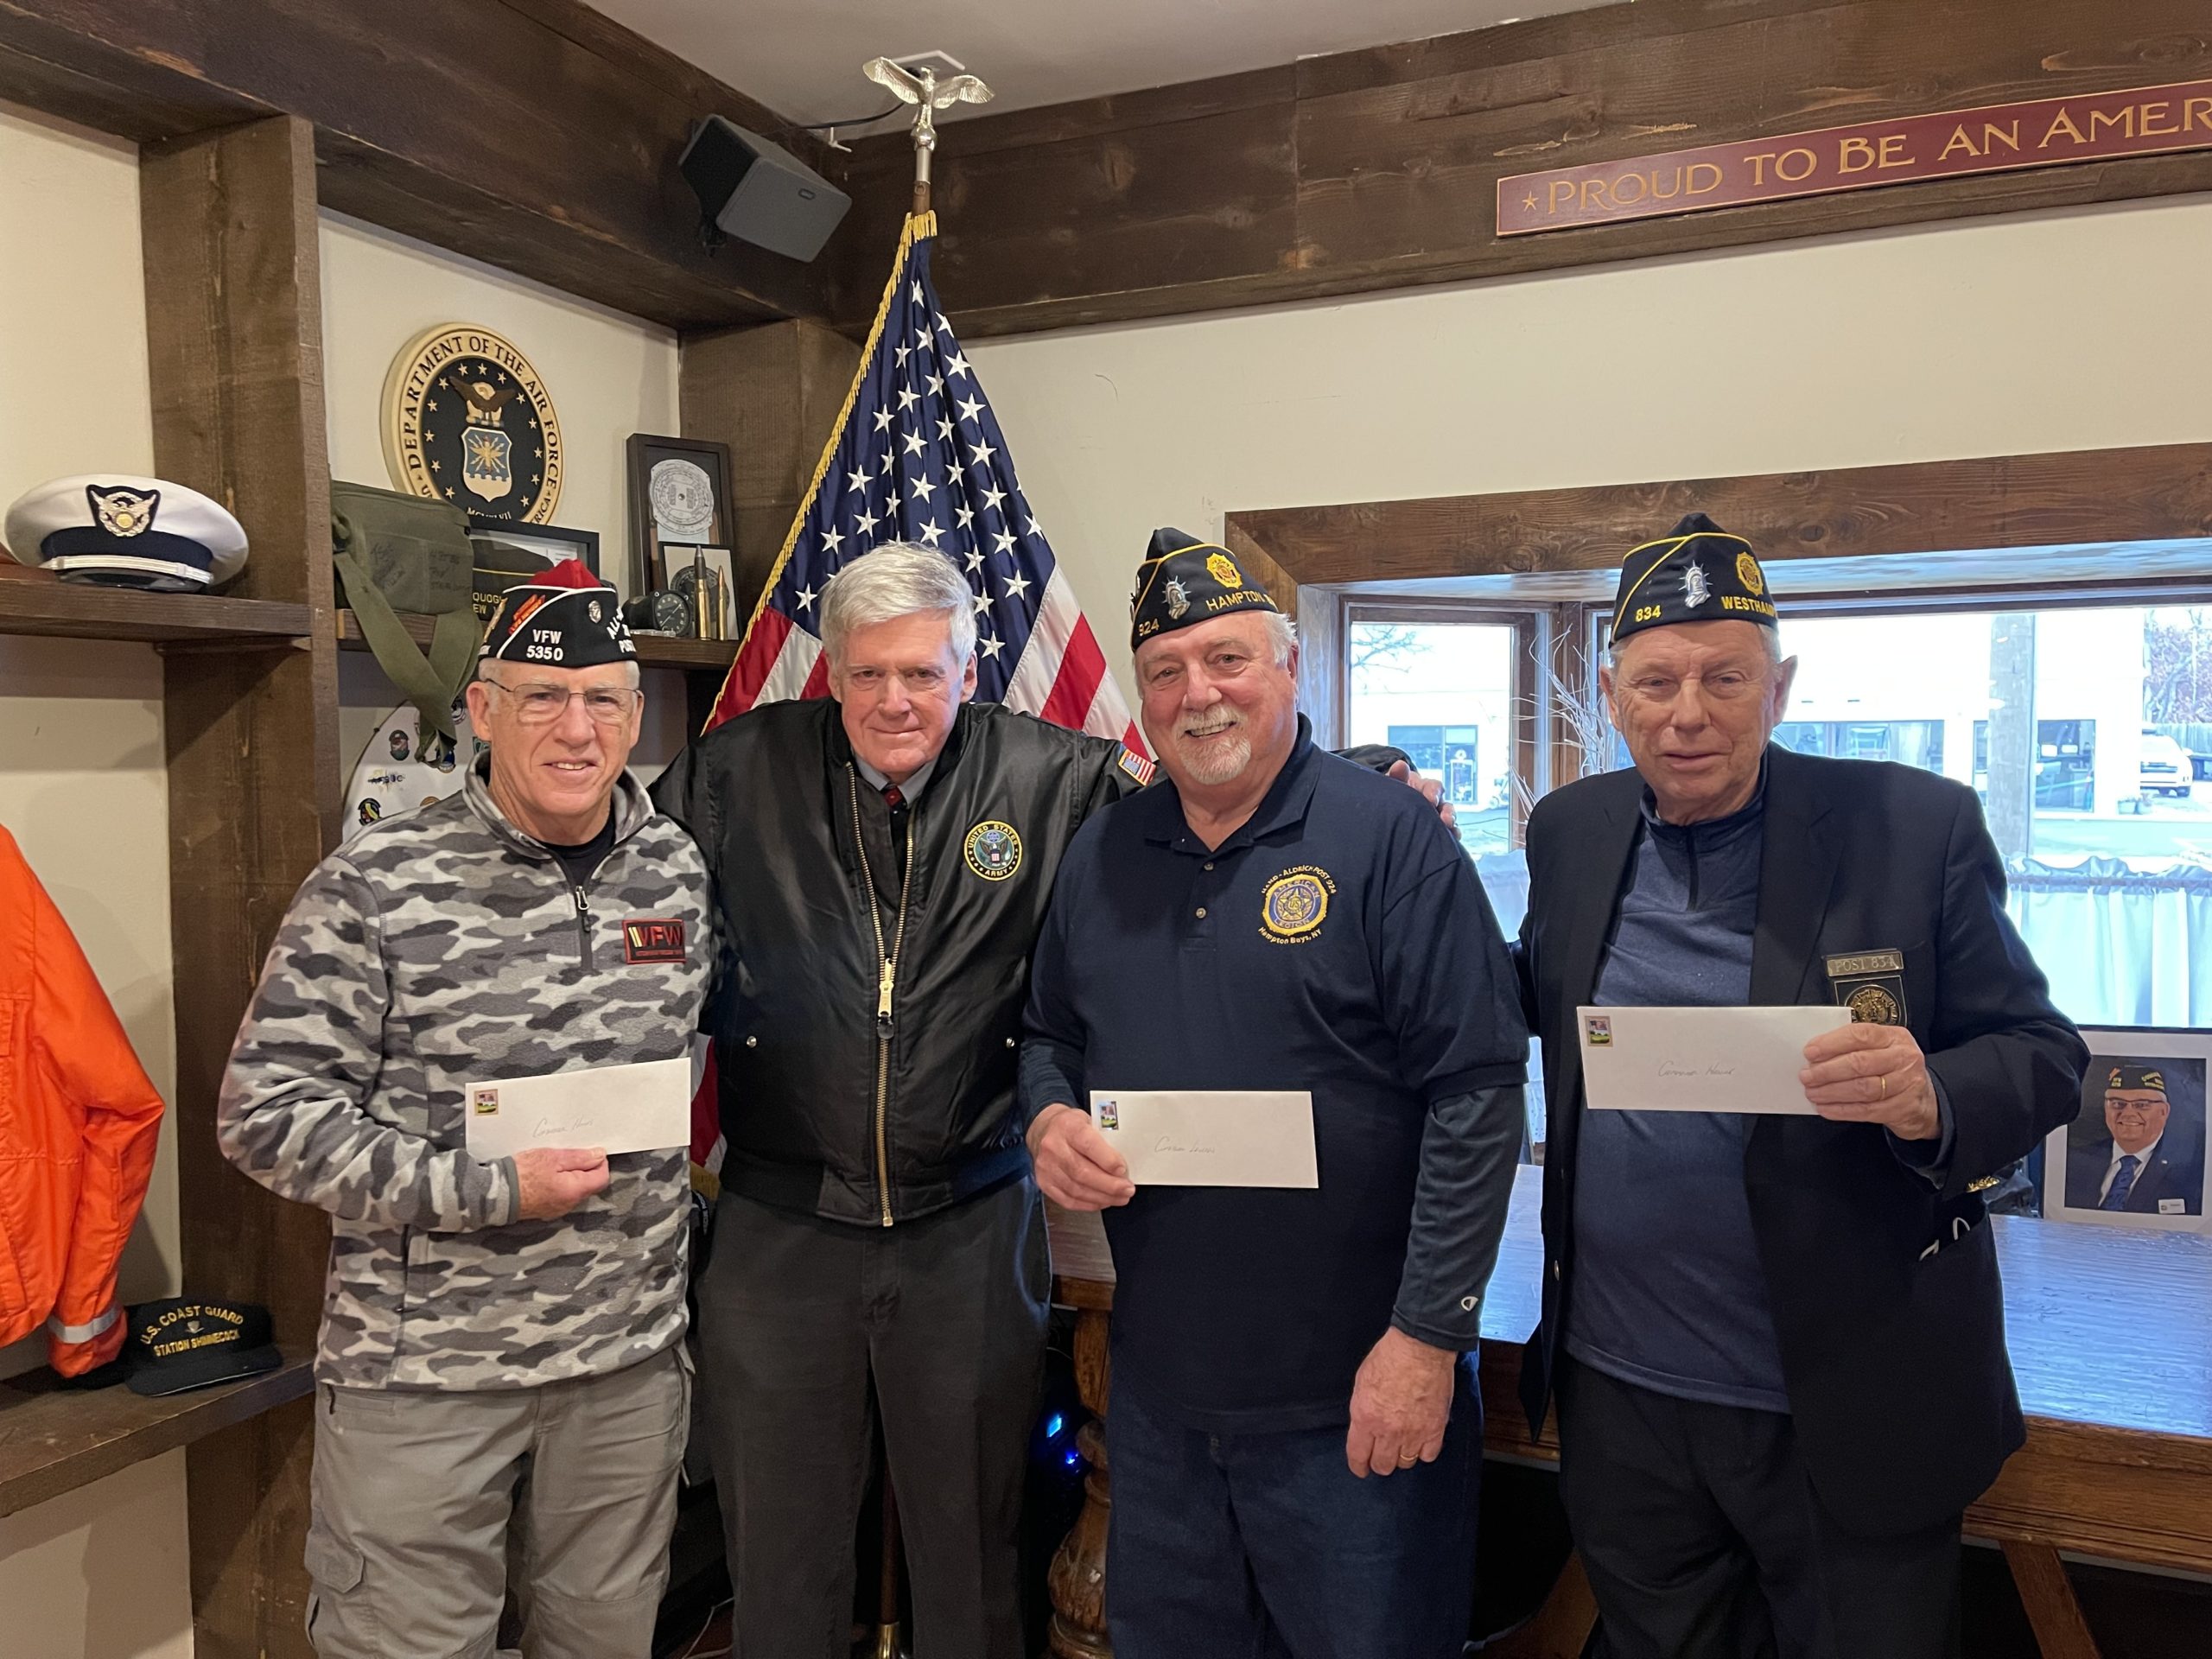 Checks totally $4,000 were presented to commanders of local veterans posts on Friday, January 14, during a gathering on the Westhampton Beach VFW headquarters. The check represented each posts portion of the proceeds of the Warriors Rock concert, which took place over Veterans Day weekend at the Westhampton Beach Performing Arts Center. From left,  during a brief ceremony at which the commanders of local veteran posts were presented with checks from the Warriors Rock band covering their portion of proceeds from the Veterans Day Weekend concert held at the Westhampton Beach Performing Arts Center.  From left,  William Hughes, commander of the Westhampton VFW Post; George M. Motz, representing  the nonprofit Warriors Rock; John Lenihan, commander of the Hampton Bays American Legion Post; and Thomas Hadlock, commander of the Westhampton American Legion Post.